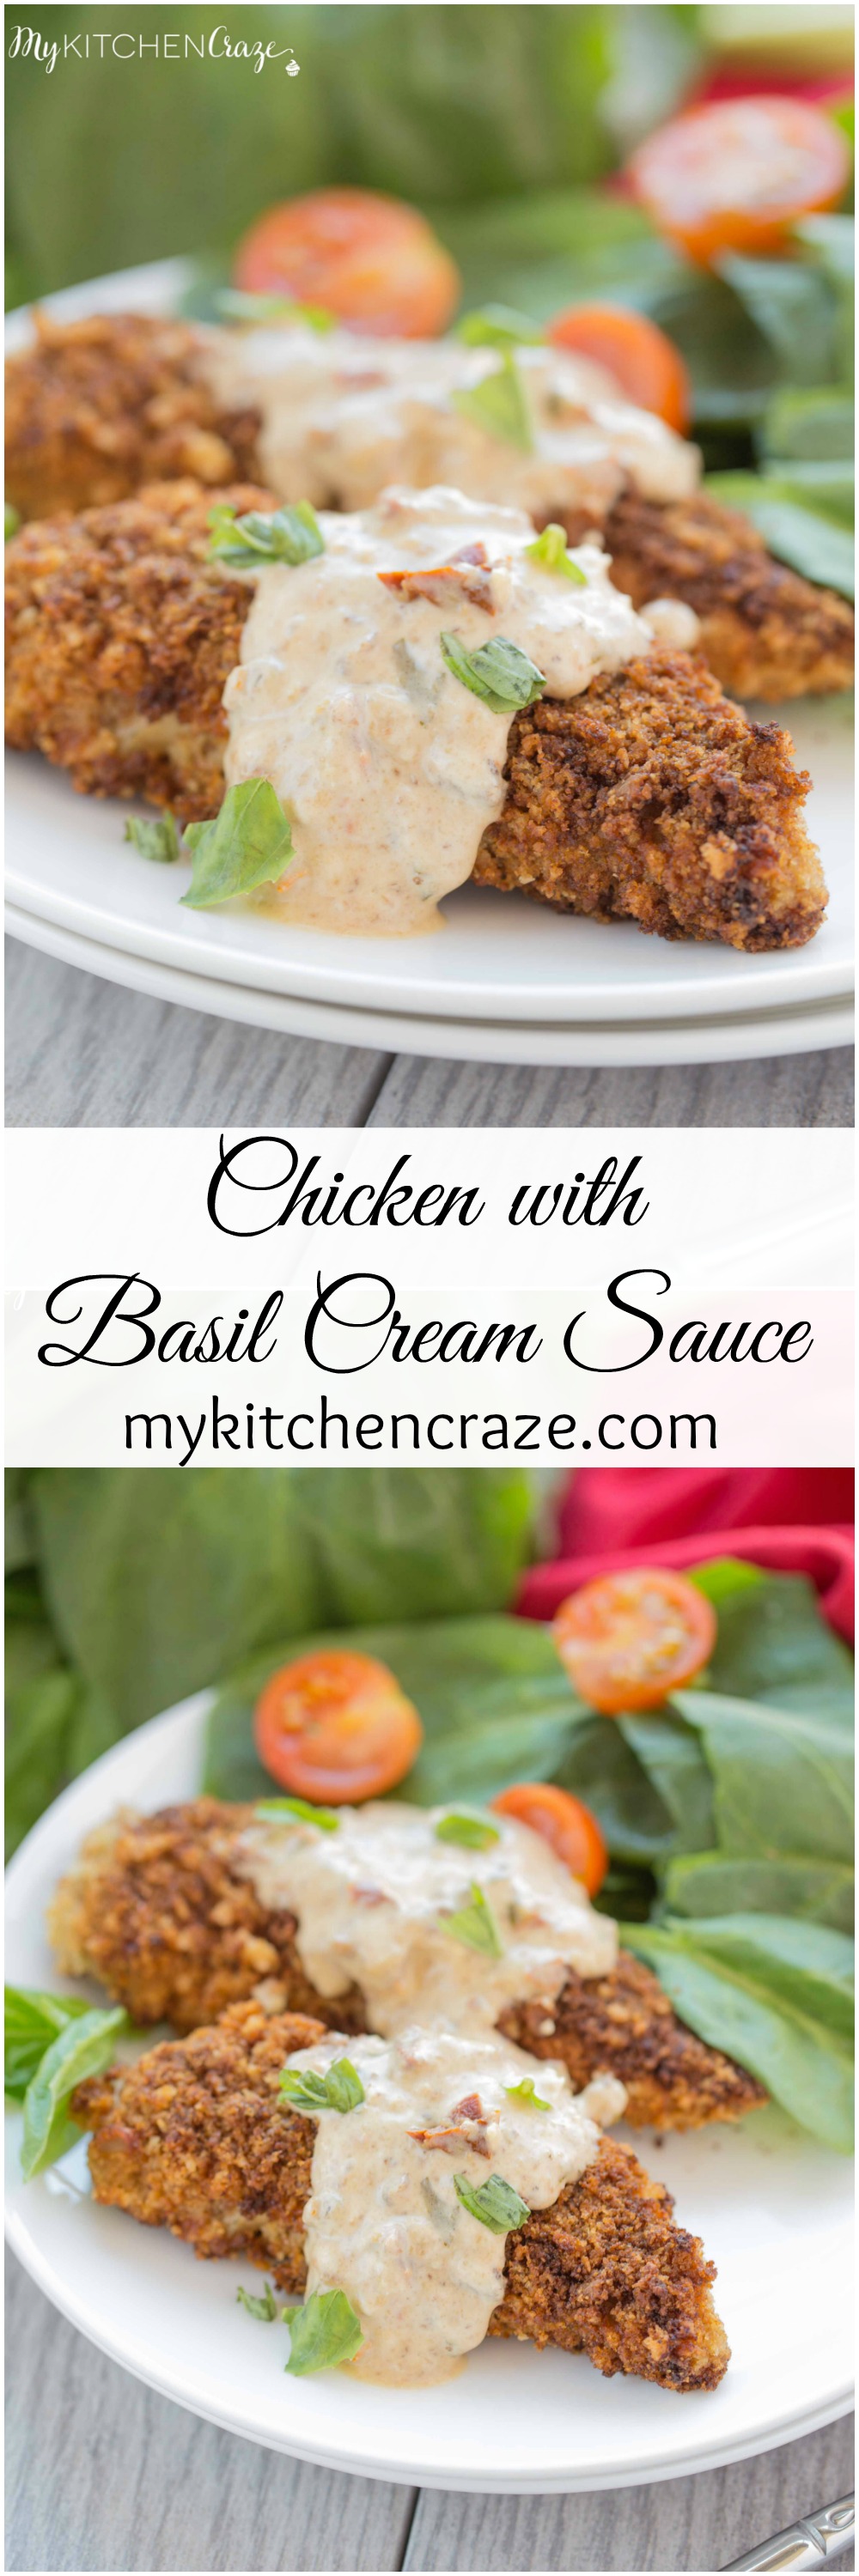 Chicken with Basil Cream Sauce ~ mykitchencraze.com ~ Sick of the same old chicken? Then you need to try this delicious Chicken with Basil Cream Sauce. You'll never go back to plain chicken again.